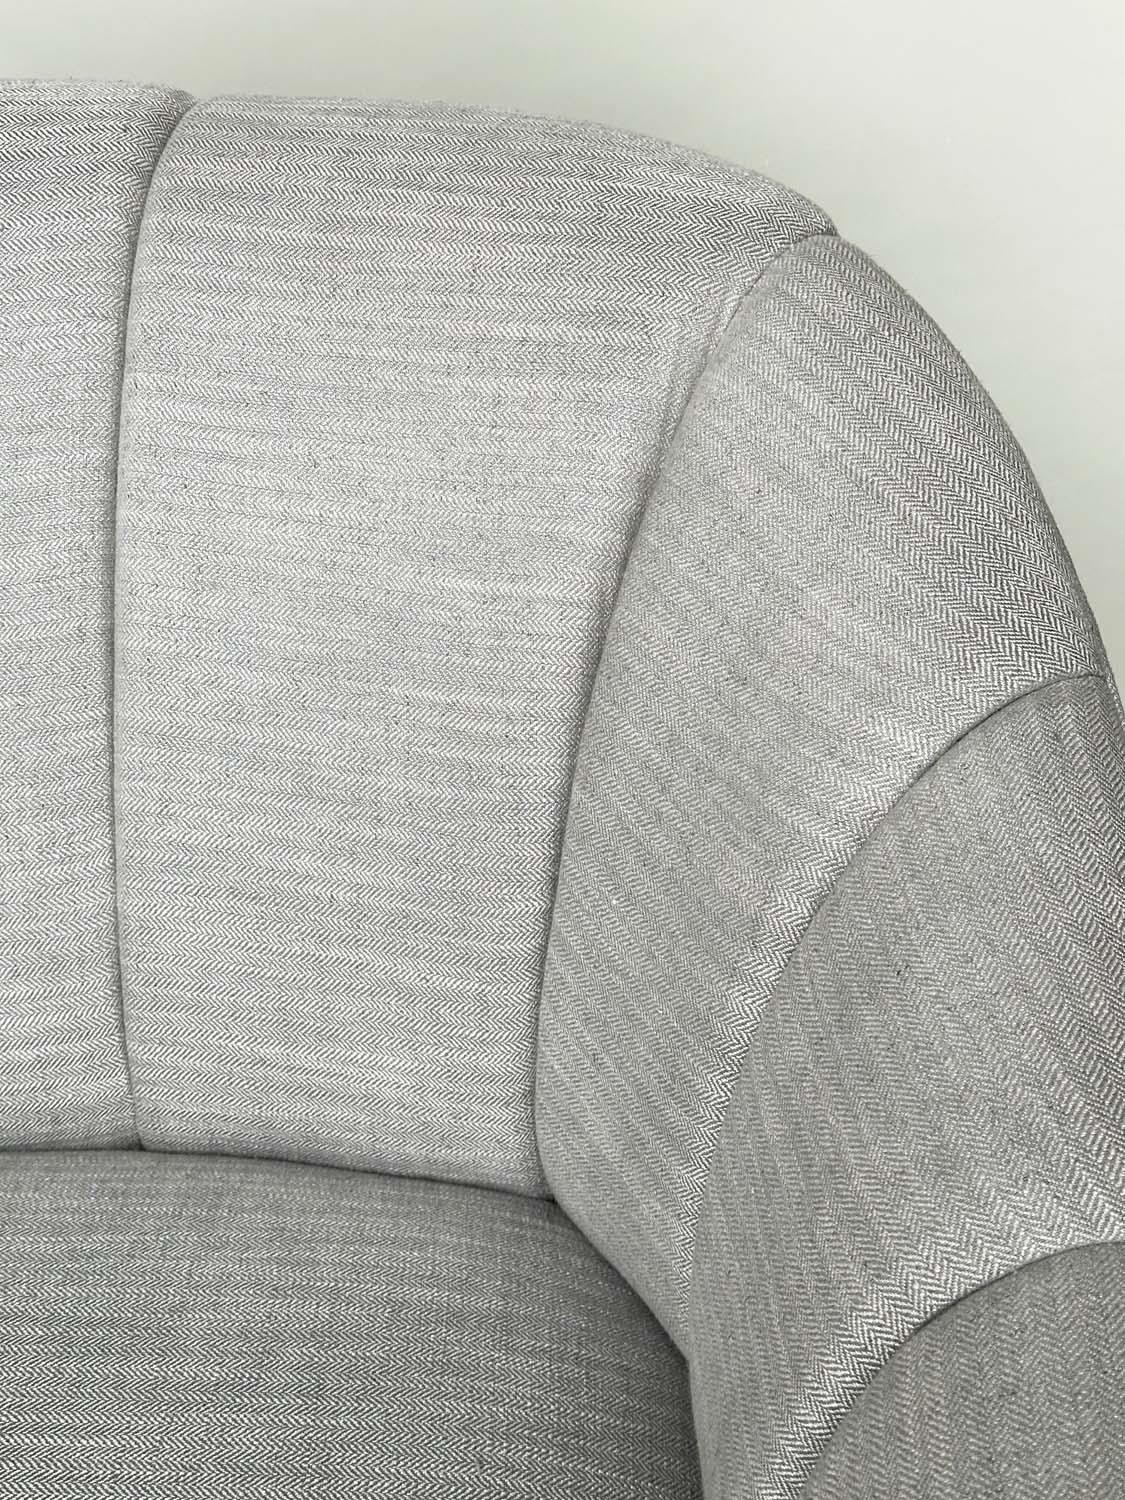 BRAY DESIGN SOFA, ribbed curved back and out swept supports, in Sahco Flint fabric upholstery, 210cm - Image 5 of 11